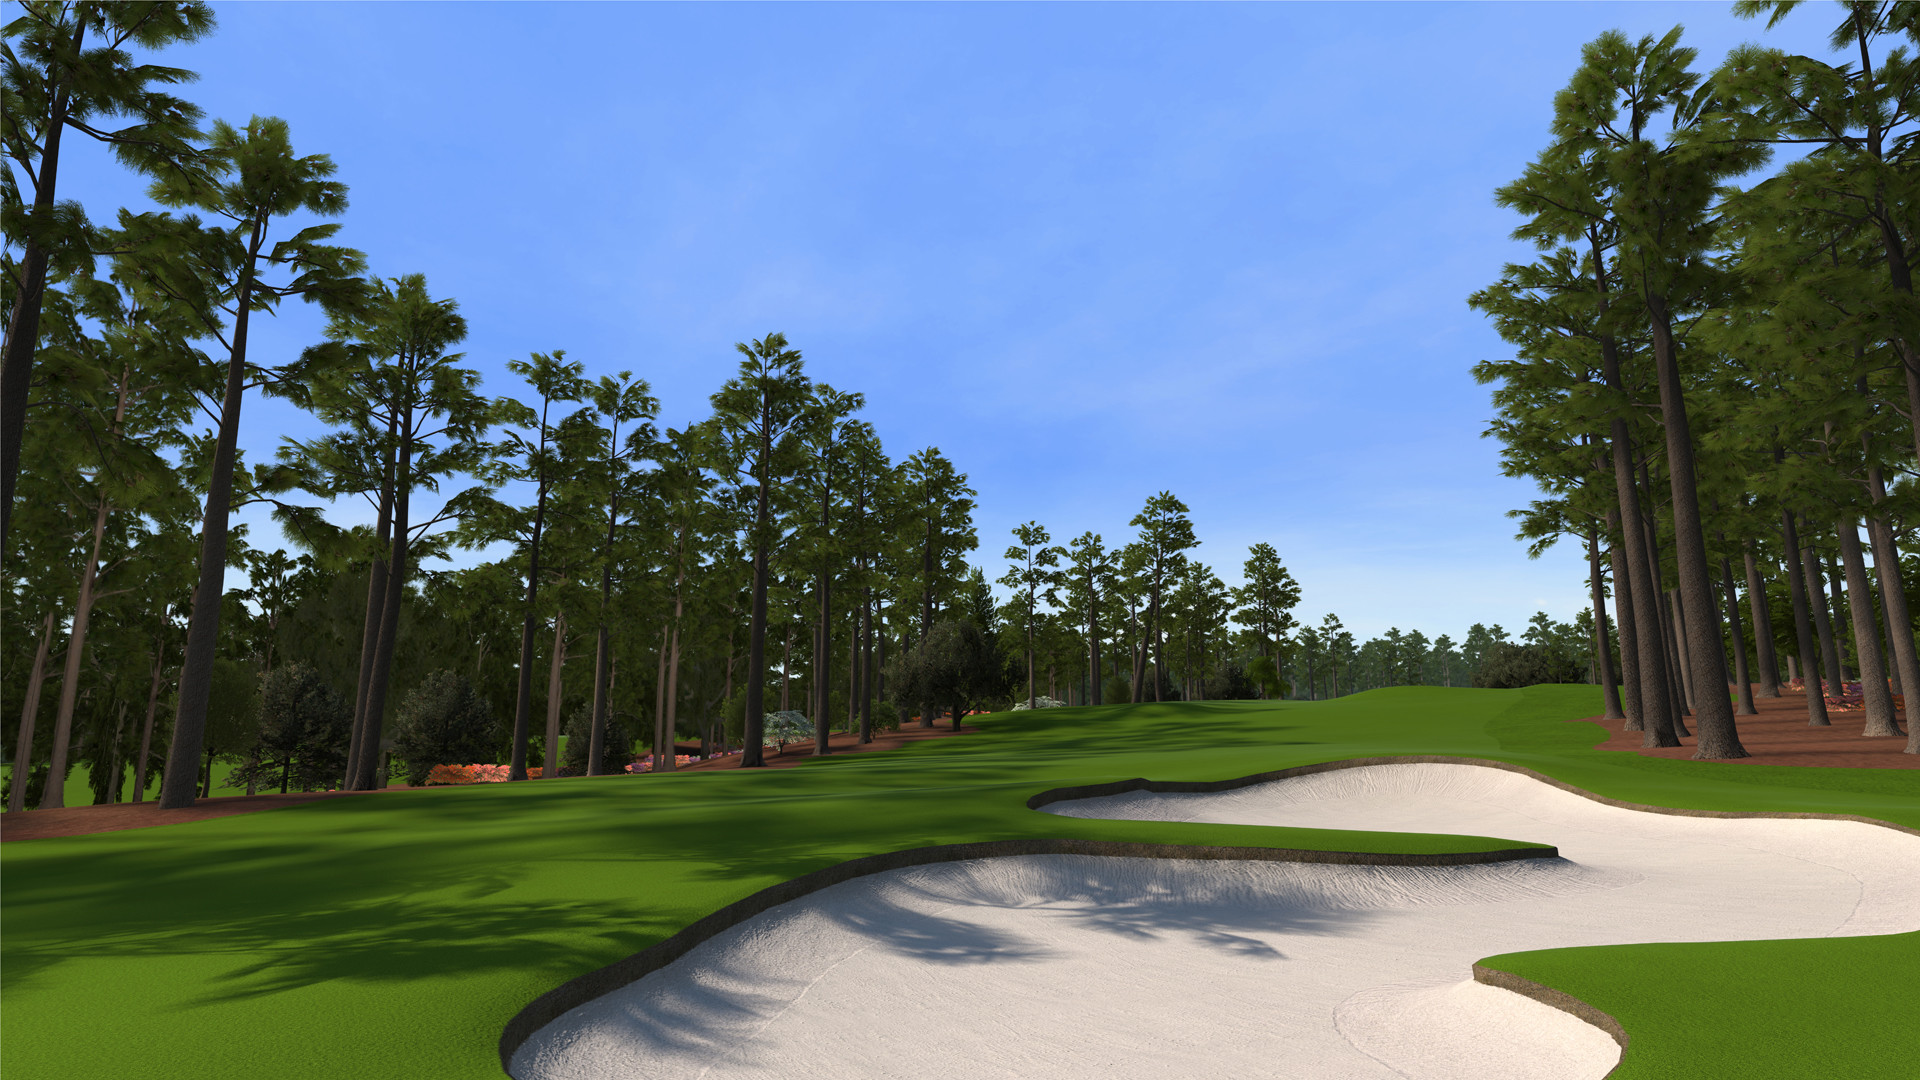 8 at Augusta National as seen in the PS3 and XBox 360 versions of Tiger Woods 12 The Masters.